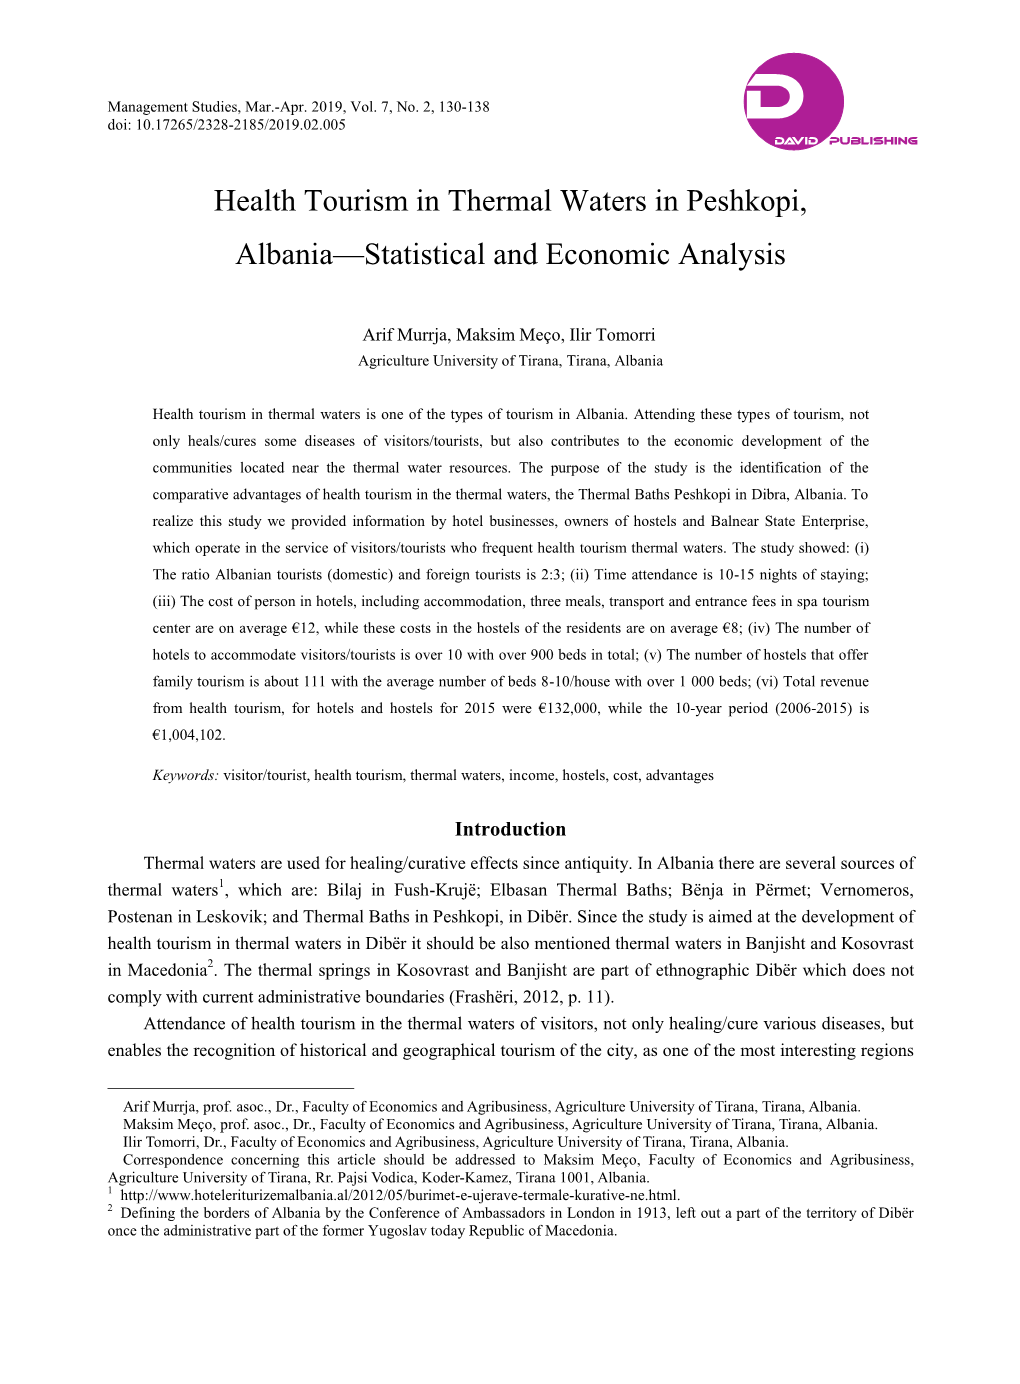 Health Tourism in Thermal Waters in Peshkopi, Albania—Statistical and Economic Analysis